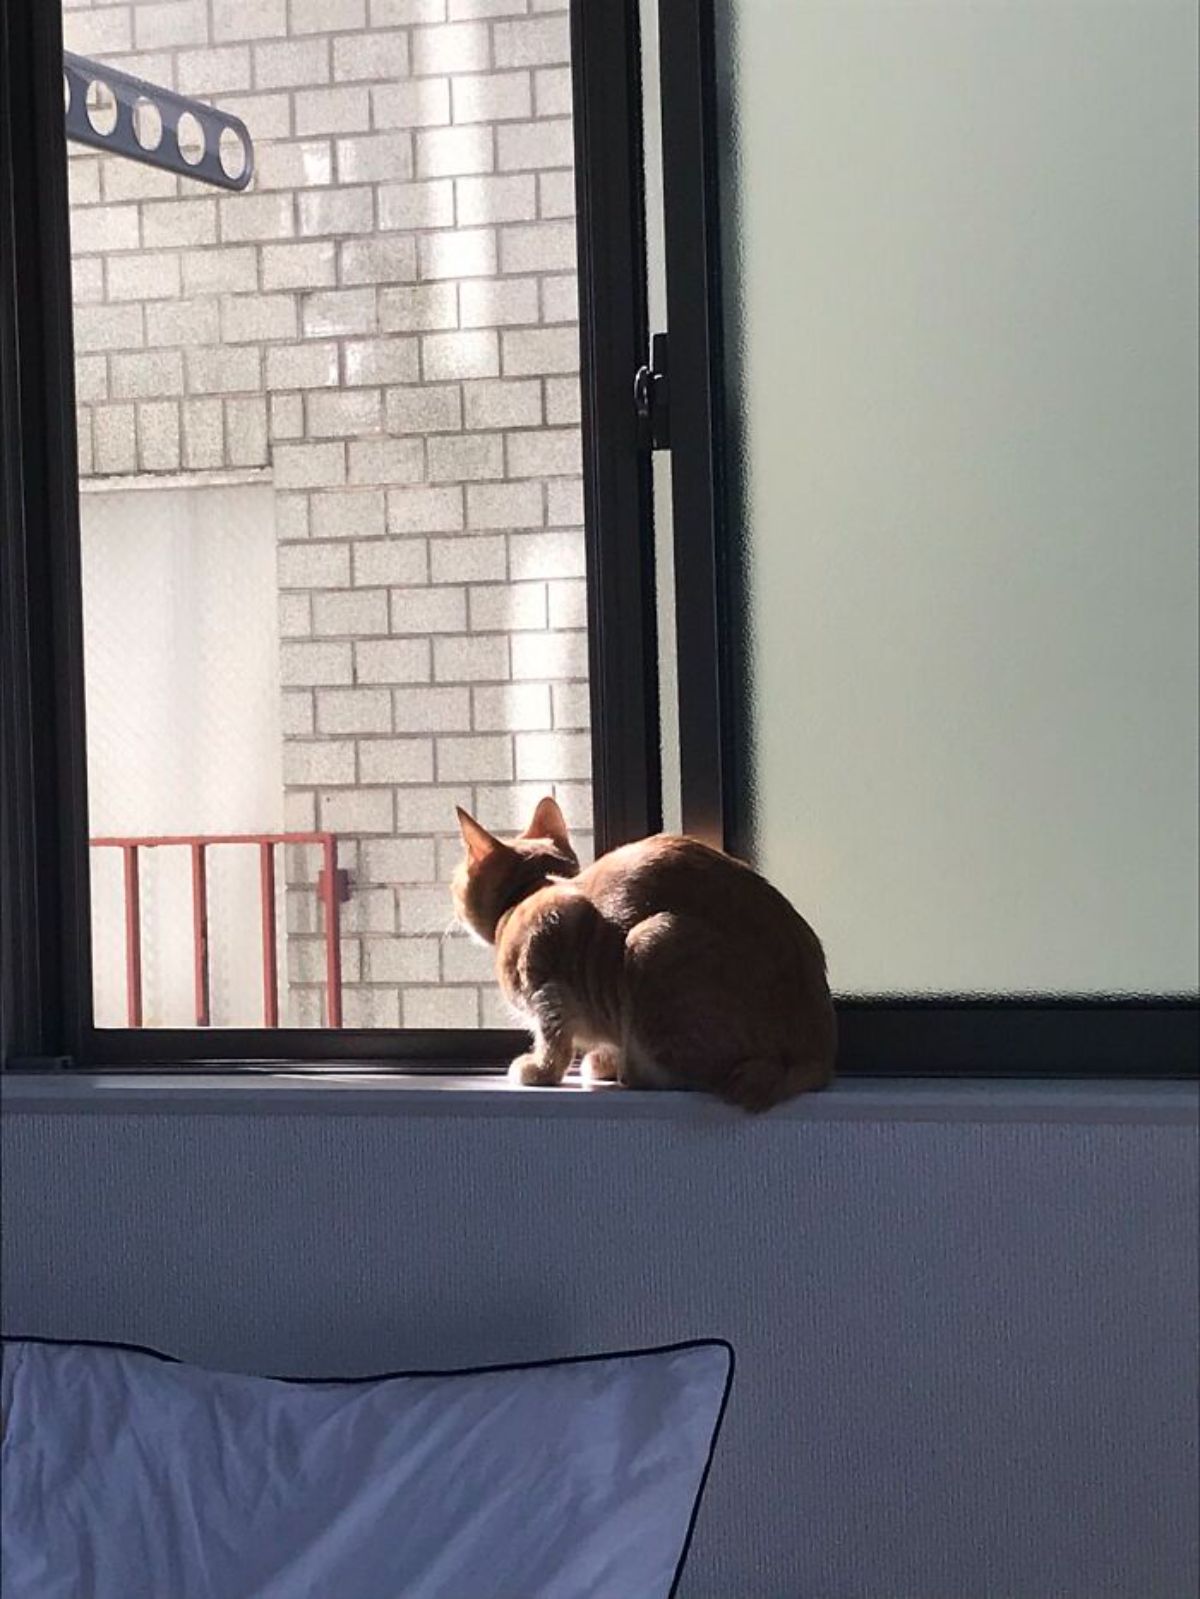 orange cat sitting on a window ledge and looking out of a window